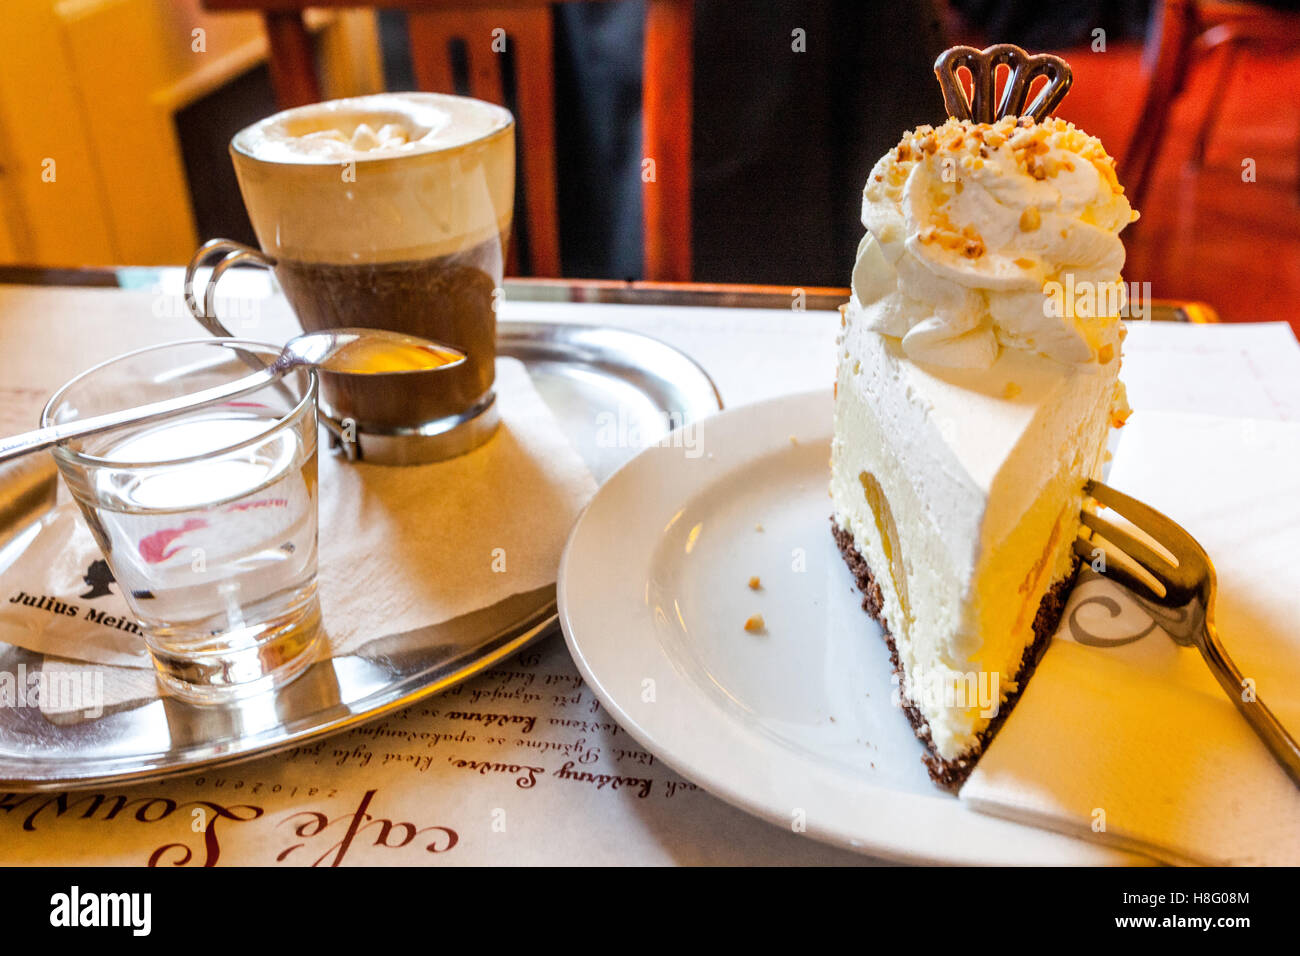 Viennese coffee Glass of Water on Tray, Cheesecake at Cafe Louvre Prague cafes Stock Photo